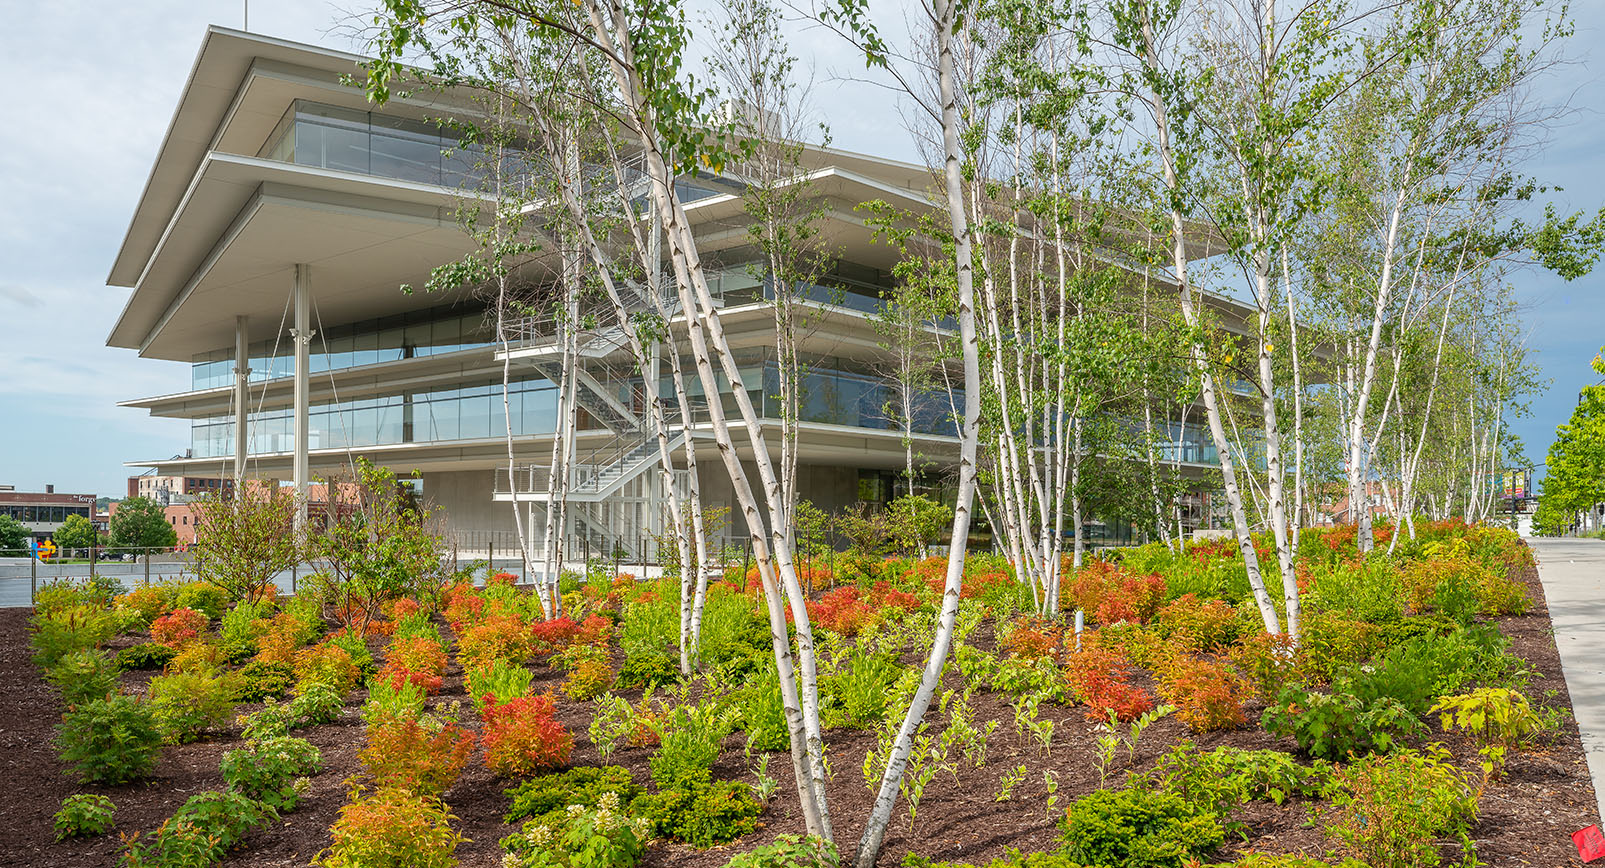 landscaping Outside Of The Krause Gateway Center by perfcut